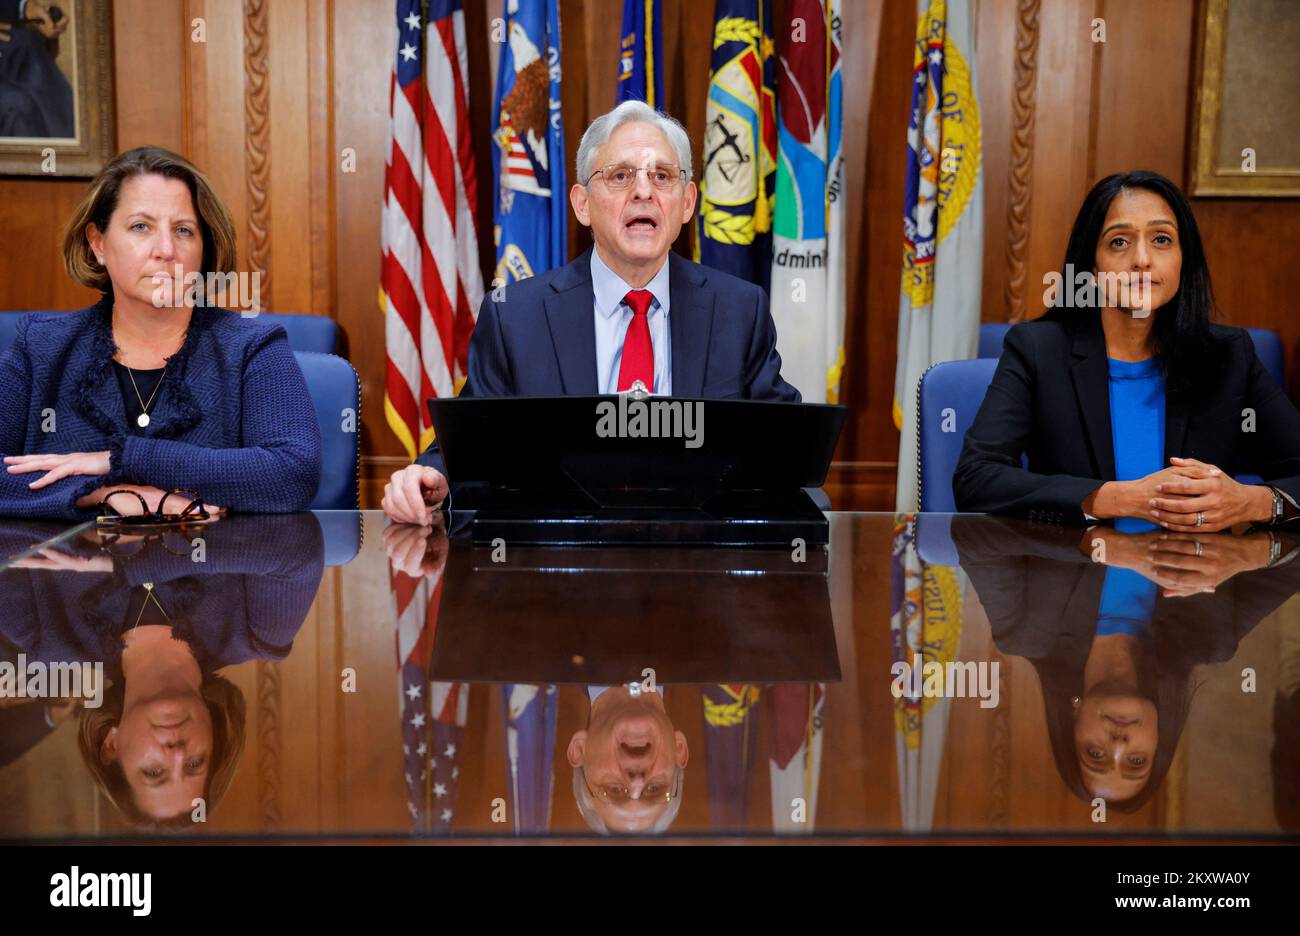 U.S. Attorney General Merrick Garland is flanked by Deputy Attorney General Lisa O. Monaco and Associate Attorney General Vanita Gupta as he discusses the verdict in the trial of Oath Keepers leaders and members in connection with in the January 6 attack on the Capitol, during a news conference at the Justice Department in Washington, U.S., November 30, 2022. REUTERS/Jim Bourg Stock Photo